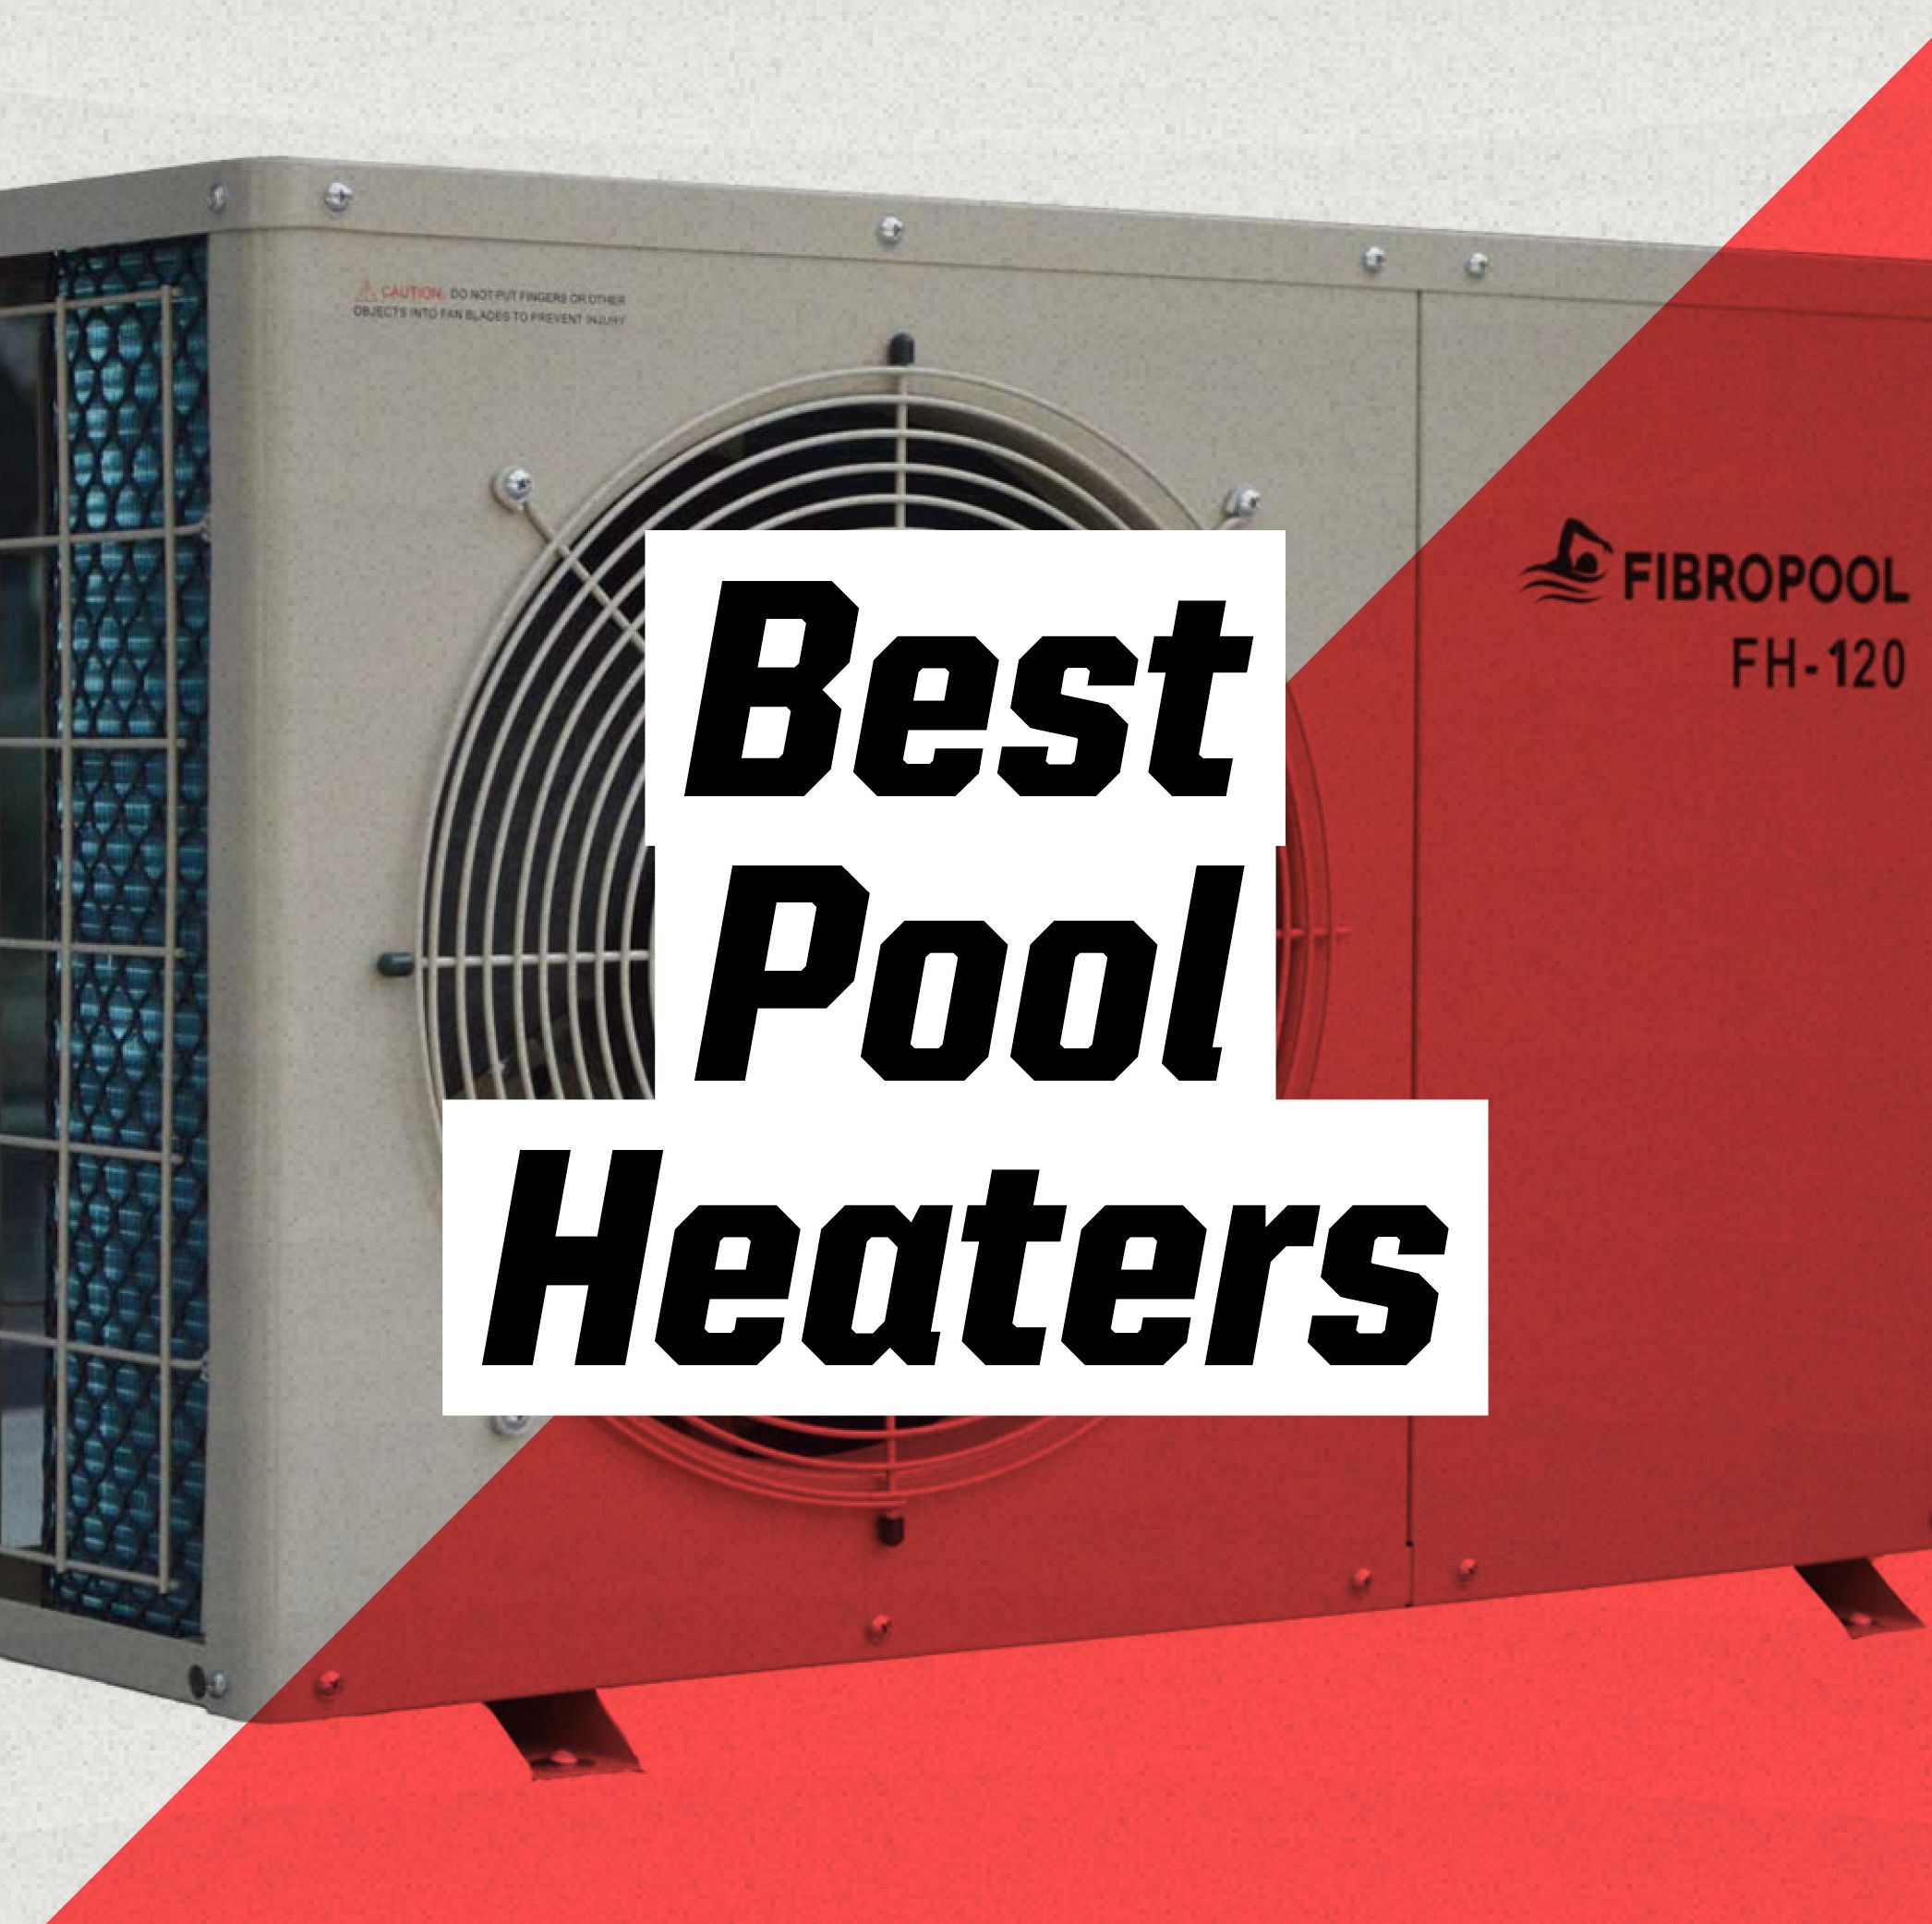 Warm, Welcoming Water Awaits With These Top-Rated Pool Heaters